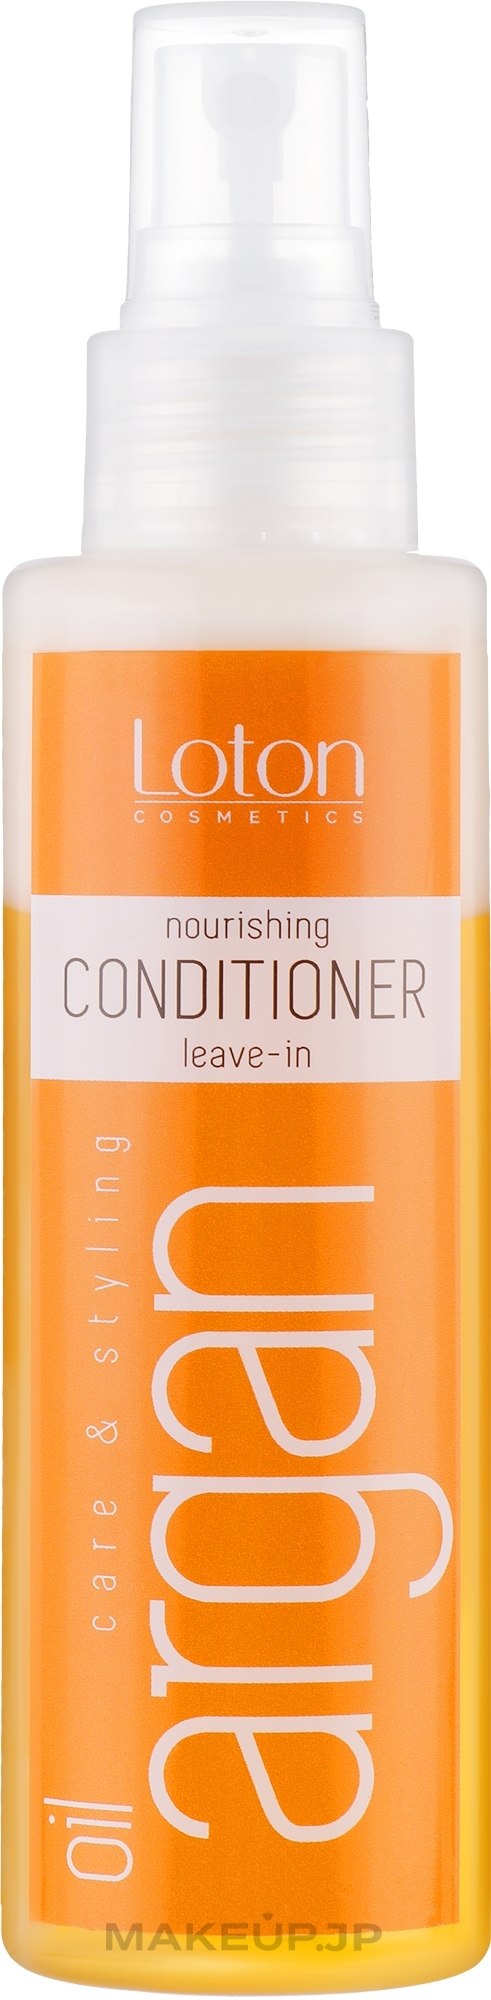 2-Phase Conditioner - Loton Two-Phase Conditioner Argan For Hair Care — photo 125 ml